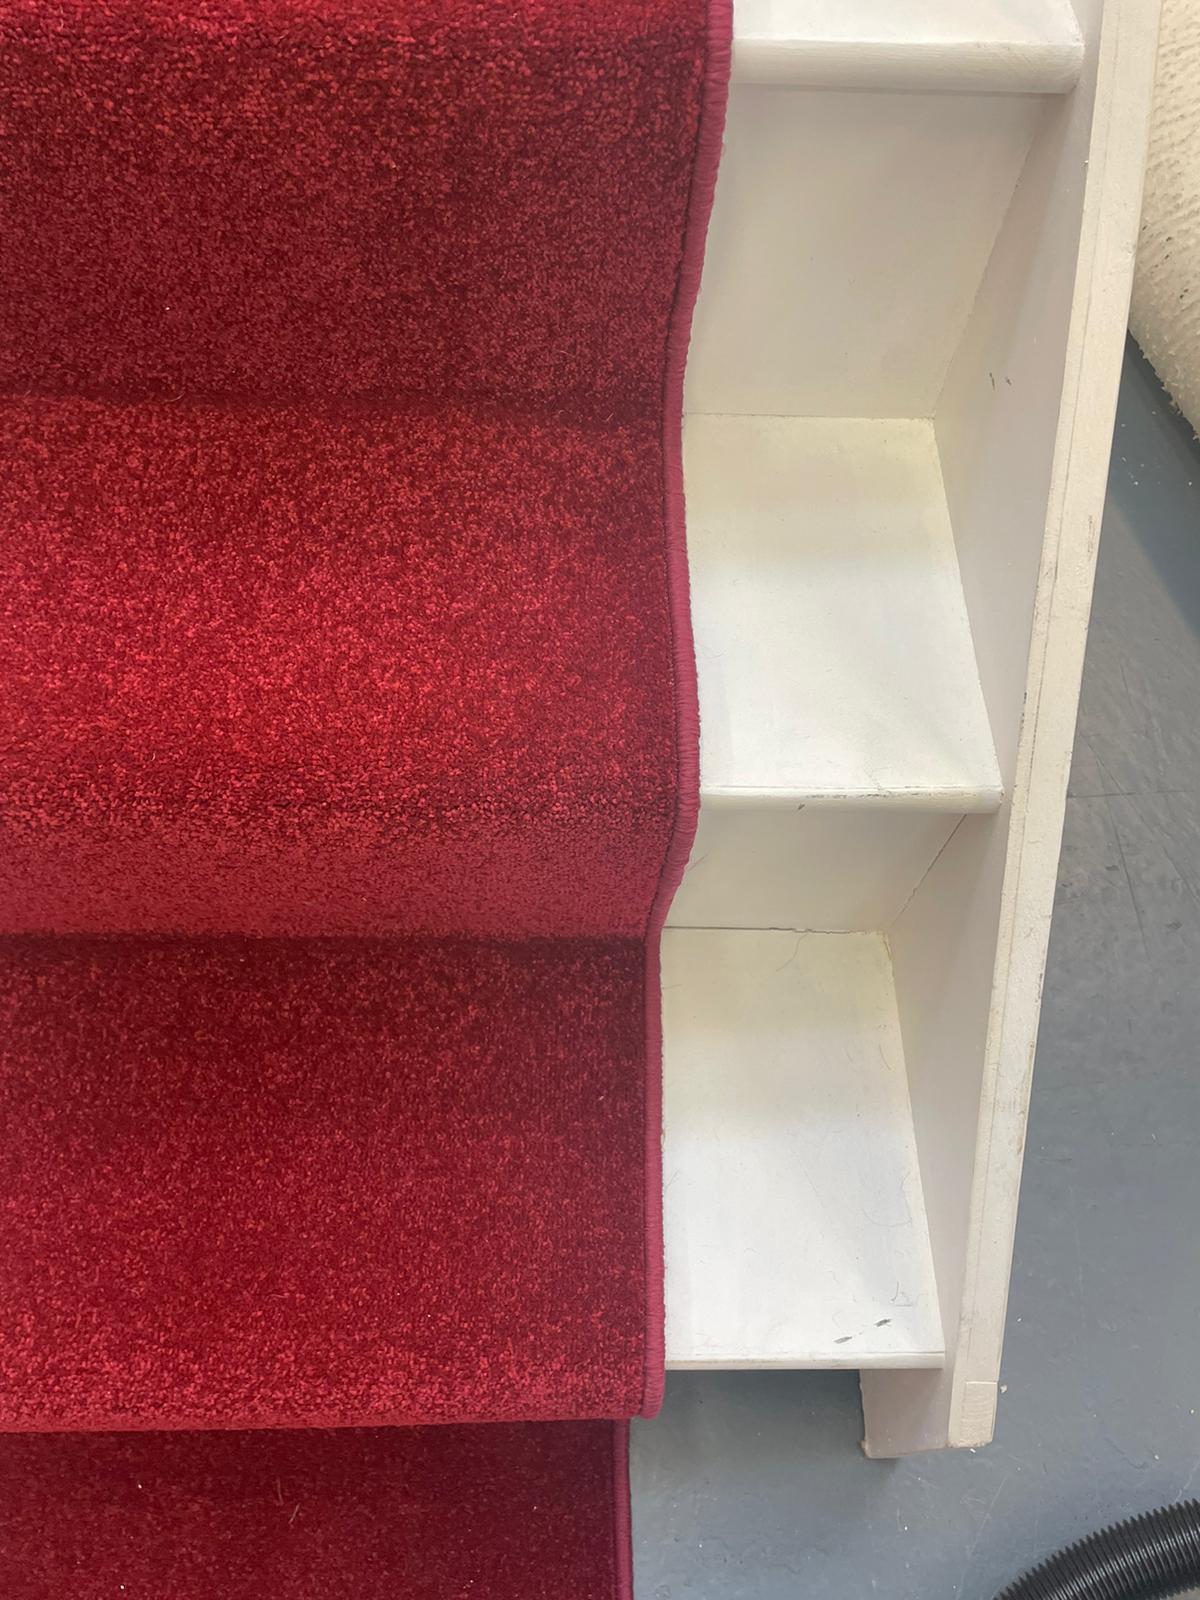 Royal red carpet stair runner with whipped edge and stain resistant